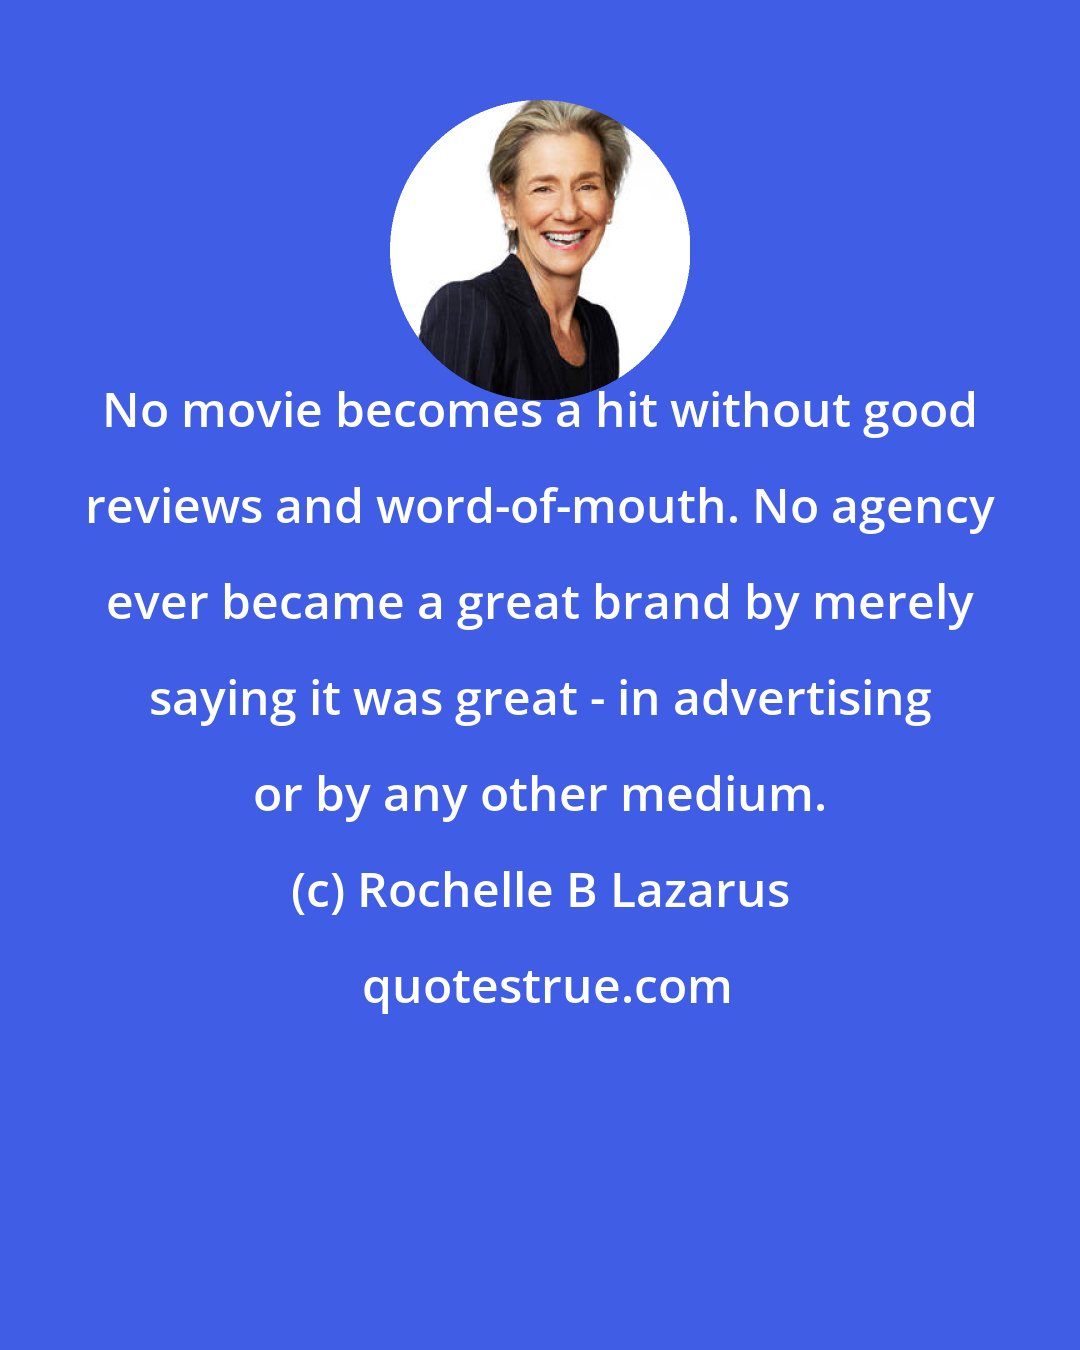 Rochelle B Lazarus: No movie becomes a hit without good reviews and word-of-mouth. No agency ever became a great brand by merely saying it was great - in advertising or by any other medium.